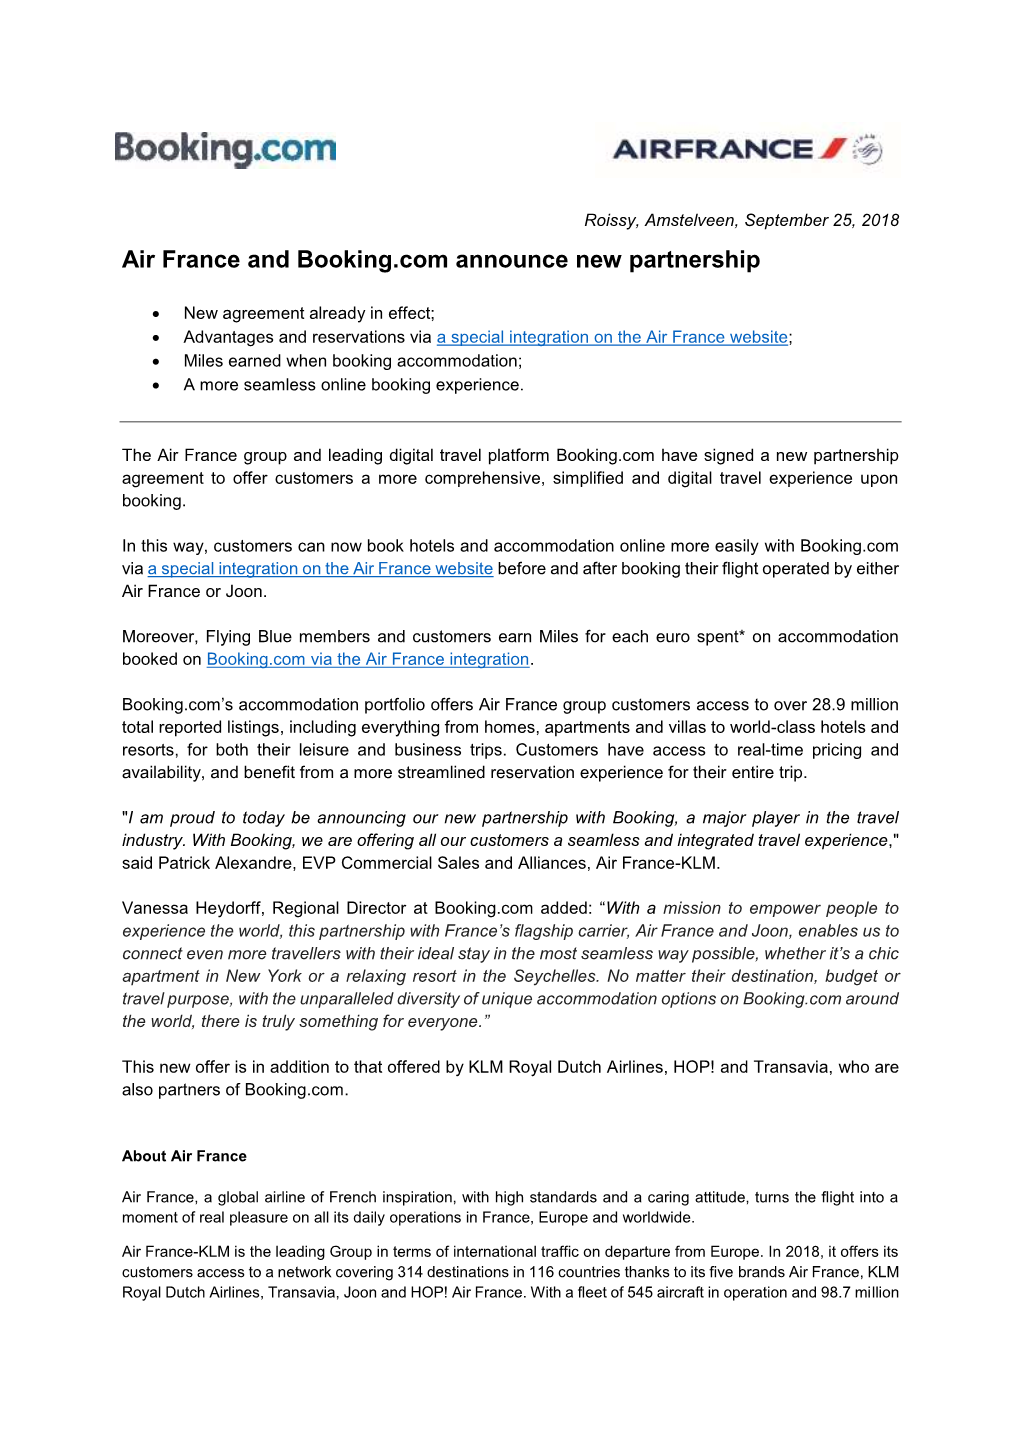 Air France and Booking.Com Announce New Partnership